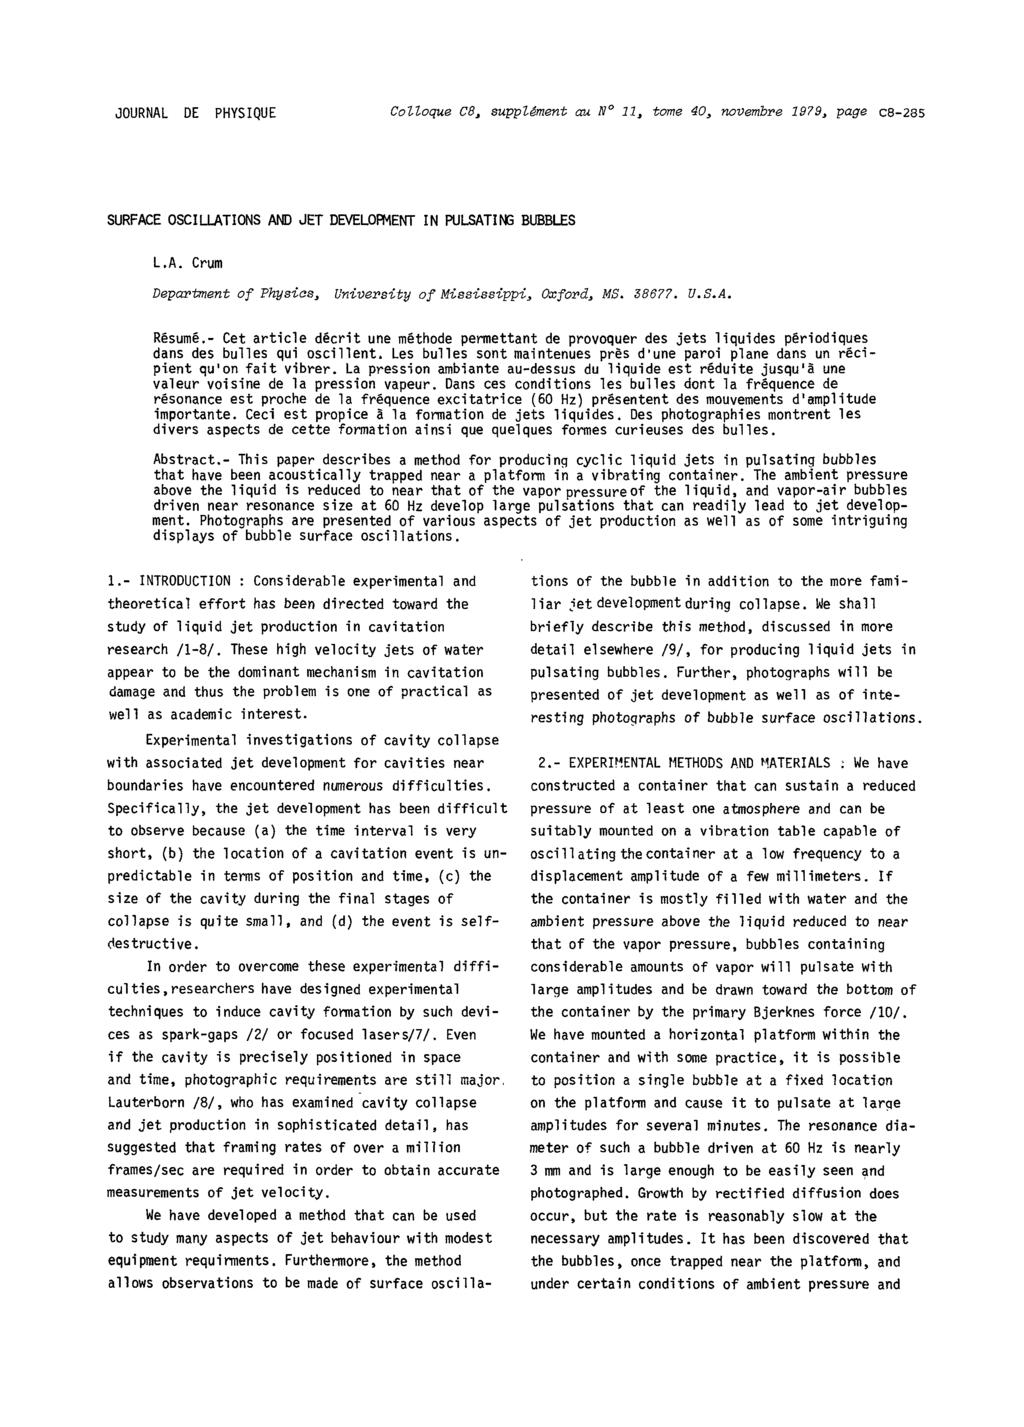 JOURNAL DE PHYSIQUE Colloque C8, supplément au N 11, tome 40, novembre 1979, page C8-285 SURFACE OSCILLATIONS AND JET DEVELOPMENT IN PULSATING BUBBLES L.A. Crum Department of Physios, University of Mississippi, Oxford, MS.